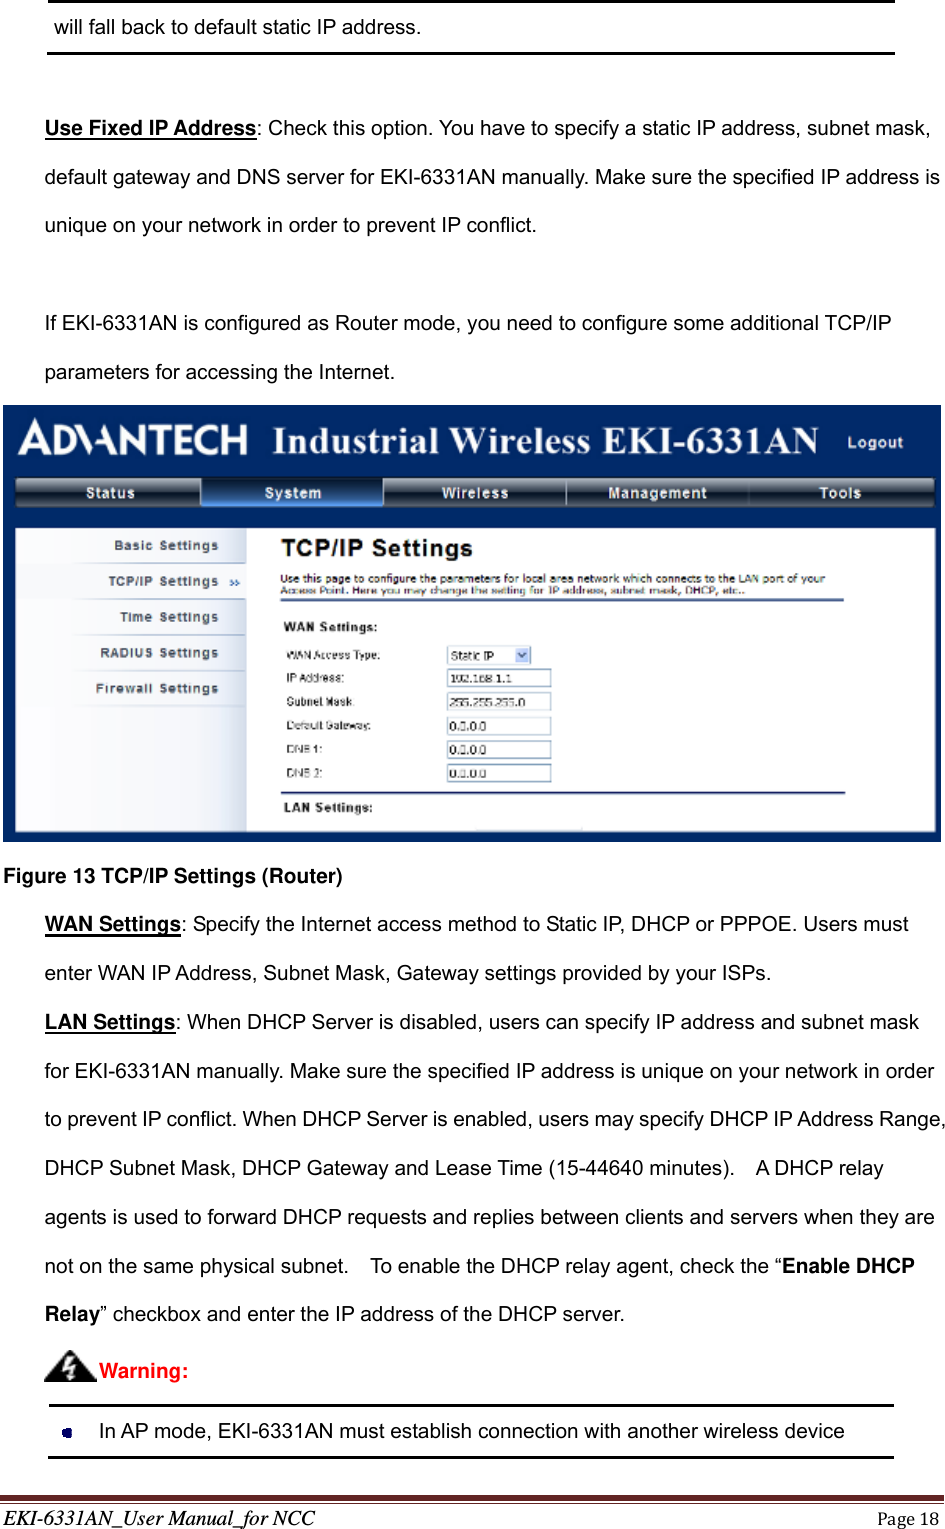 EKI-6331AN_User Manual_for NCCPage18will fall back to default static IP address.  Use Fixed IP Address: Check this option. You have to specify a static IP address, subnet mask, default gateway and DNS server for EKI-6331AN manually. Make sure the specified IP address is unique on your network in order to prevent IP conflict.  If EKI-6331AN is configured as Router mode, you need to configure some additional TCP/IP parameters for accessing the Internet.  Figure 13 TCP/IP Settings (Router)    WAN Settings: Specify the Internet access method to Static IP, DHCP or PPPOE. Users must enter WAN IP Address, Subnet Mask, Gateway settings provided by your ISPs. LAN Settings: When DHCP Server is disabled, users can specify IP address and subnet mask for EKI-6331AN manually. Make sure the specified IP address is unique on your network in order to prevent IP conflict. When DHCP Server is enabled, users may specify DHCP IP Address Range, DHCP Subnet Mask, DHCP Gateway and Lease Time (15-44640 minutes).    A DHCP relay agents is used to forward DHCP requests and replies between clients and servers when they are not on the same physical subnet.    To enable the DHCP relay agent, check the “Enable DHCP Relay” checkbox and enter the IP address of the DHCP server.    In AP mode, EKI-6331AN must establish connection with another wireless device Warning: 